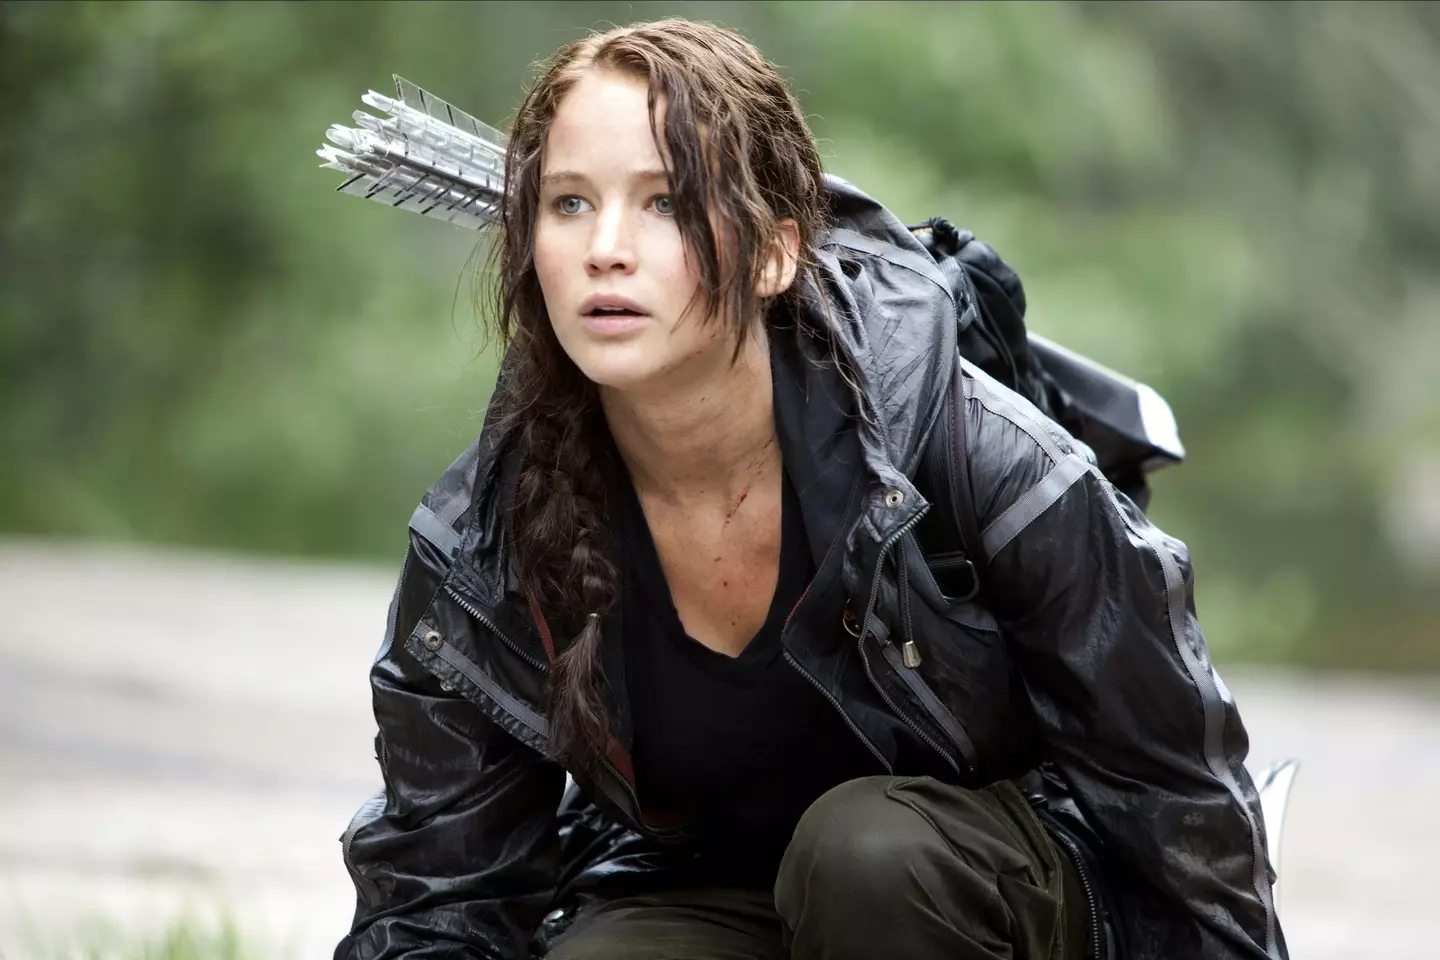 Jennifer Lawrence was casted as the female lead in The Hunger Games.